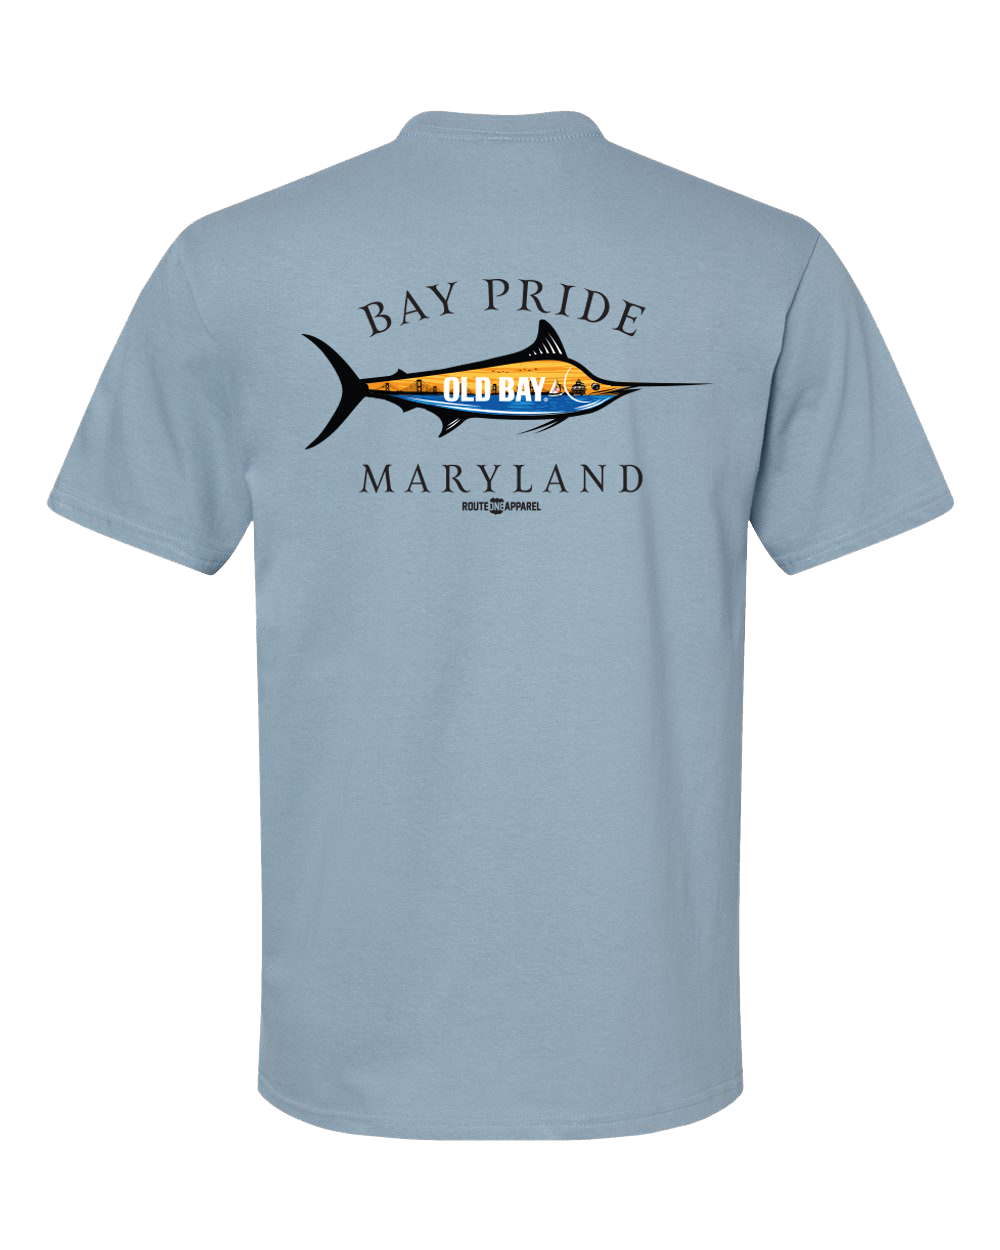 *PRE-ORDER* White Marlin OLD BAY Pride (Stone Blue) / Shirt - Route One Apparel